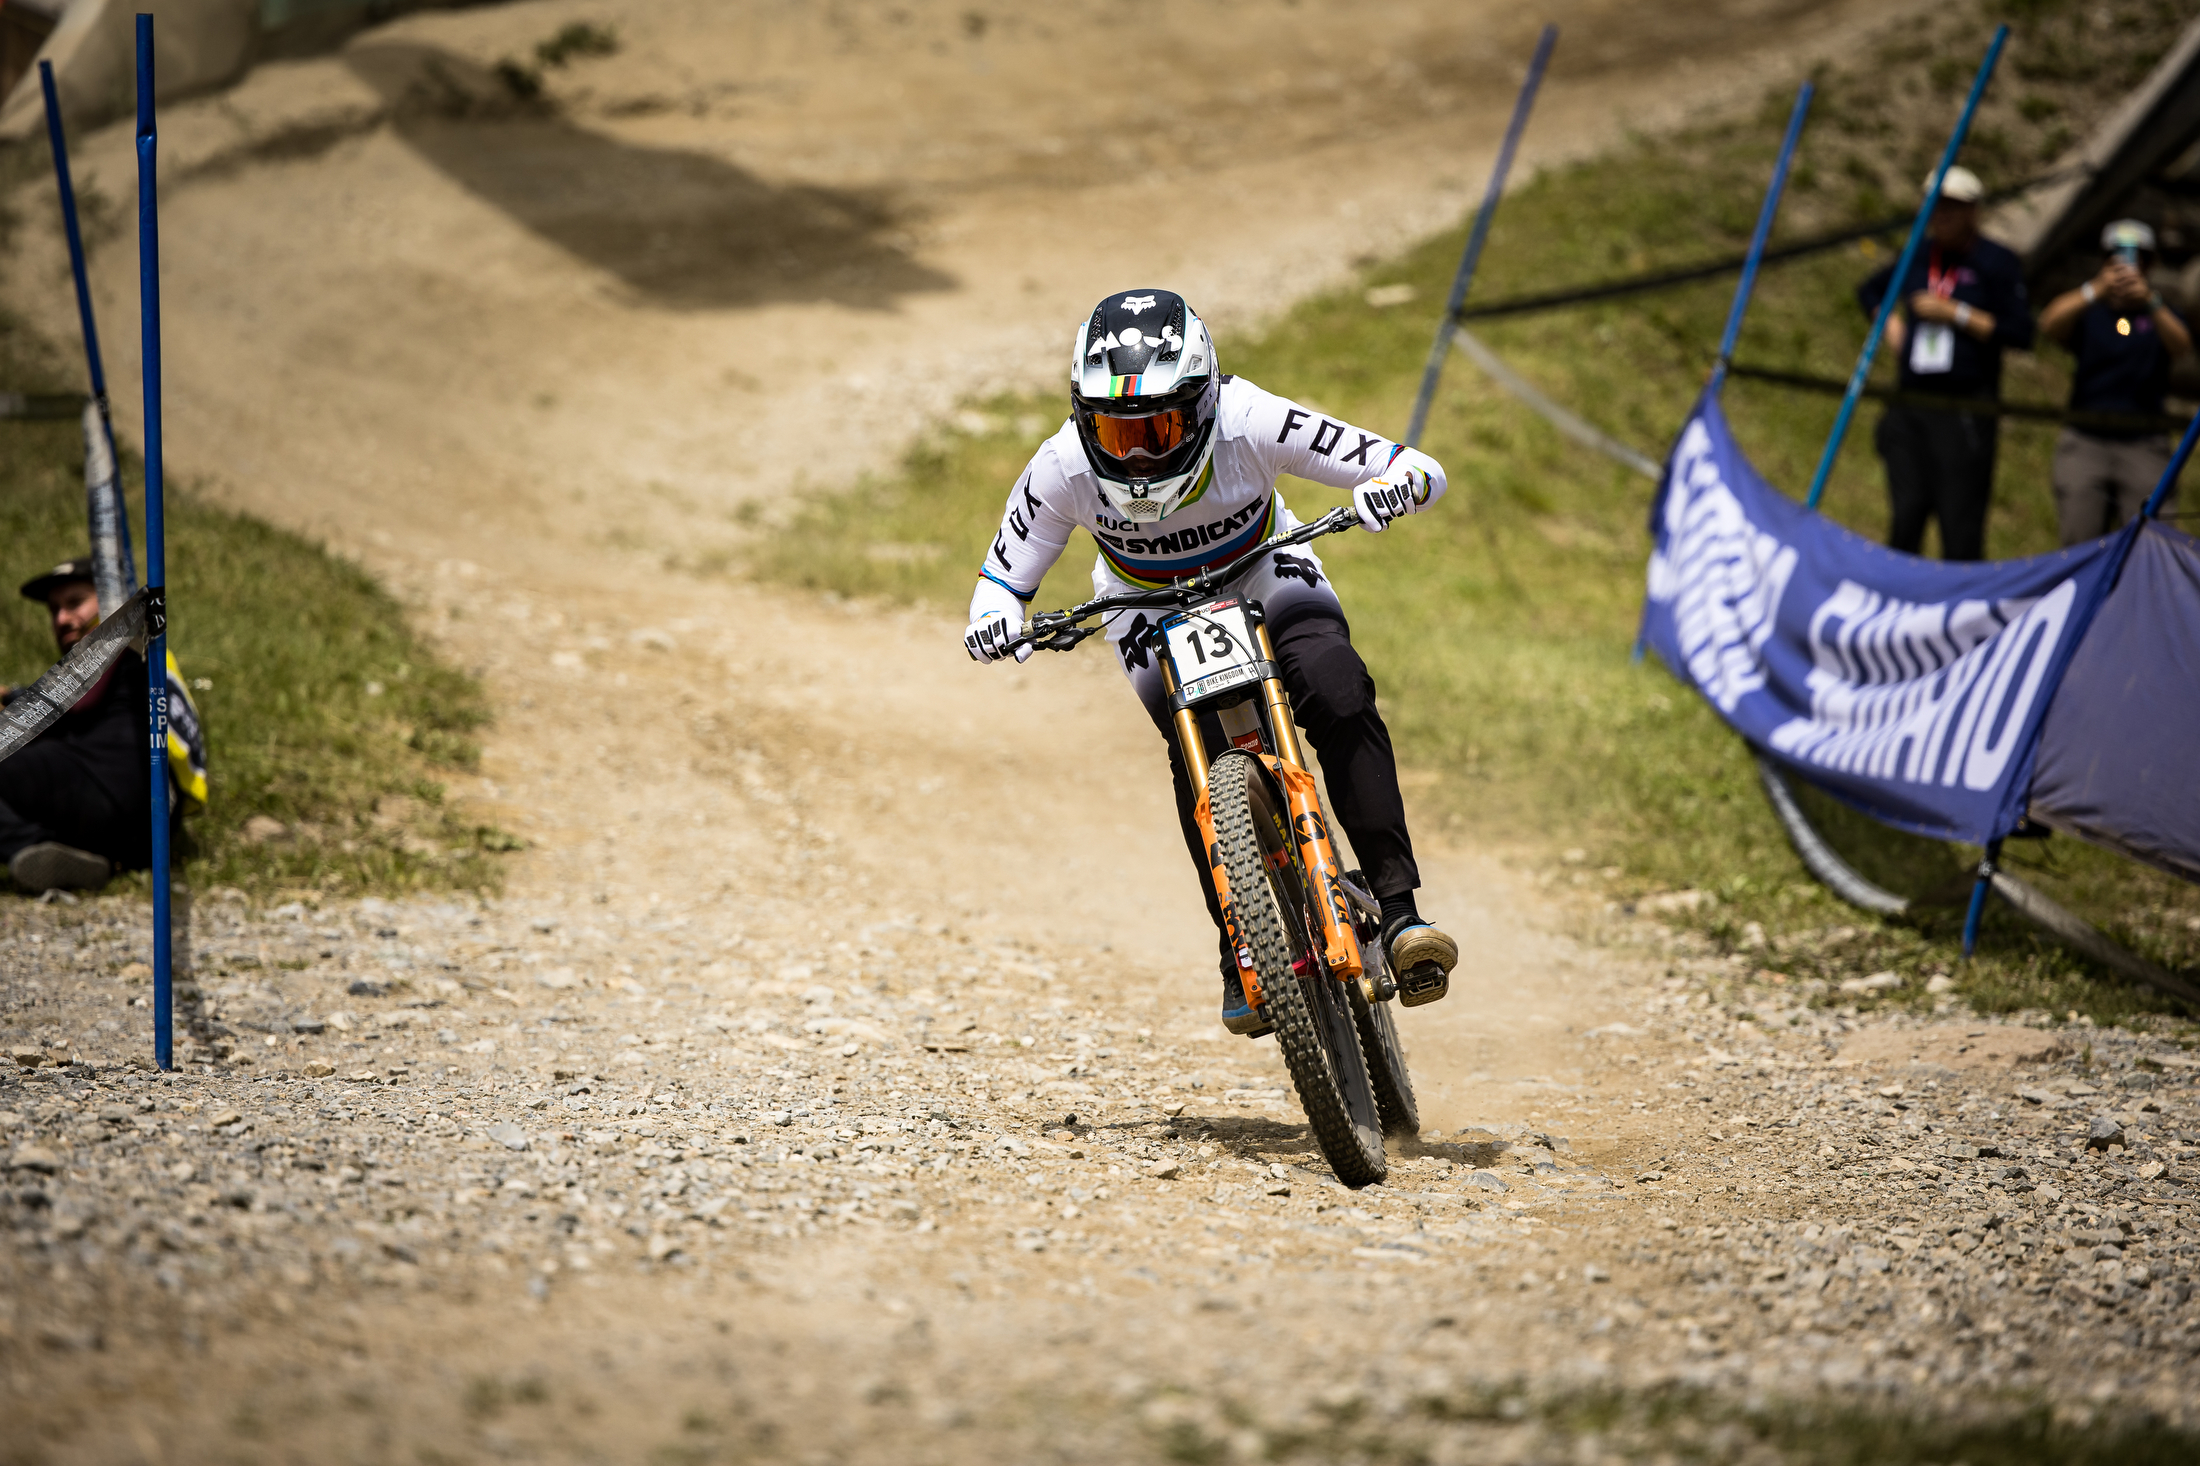 Greg on his way to 3rd in Lenzerheide